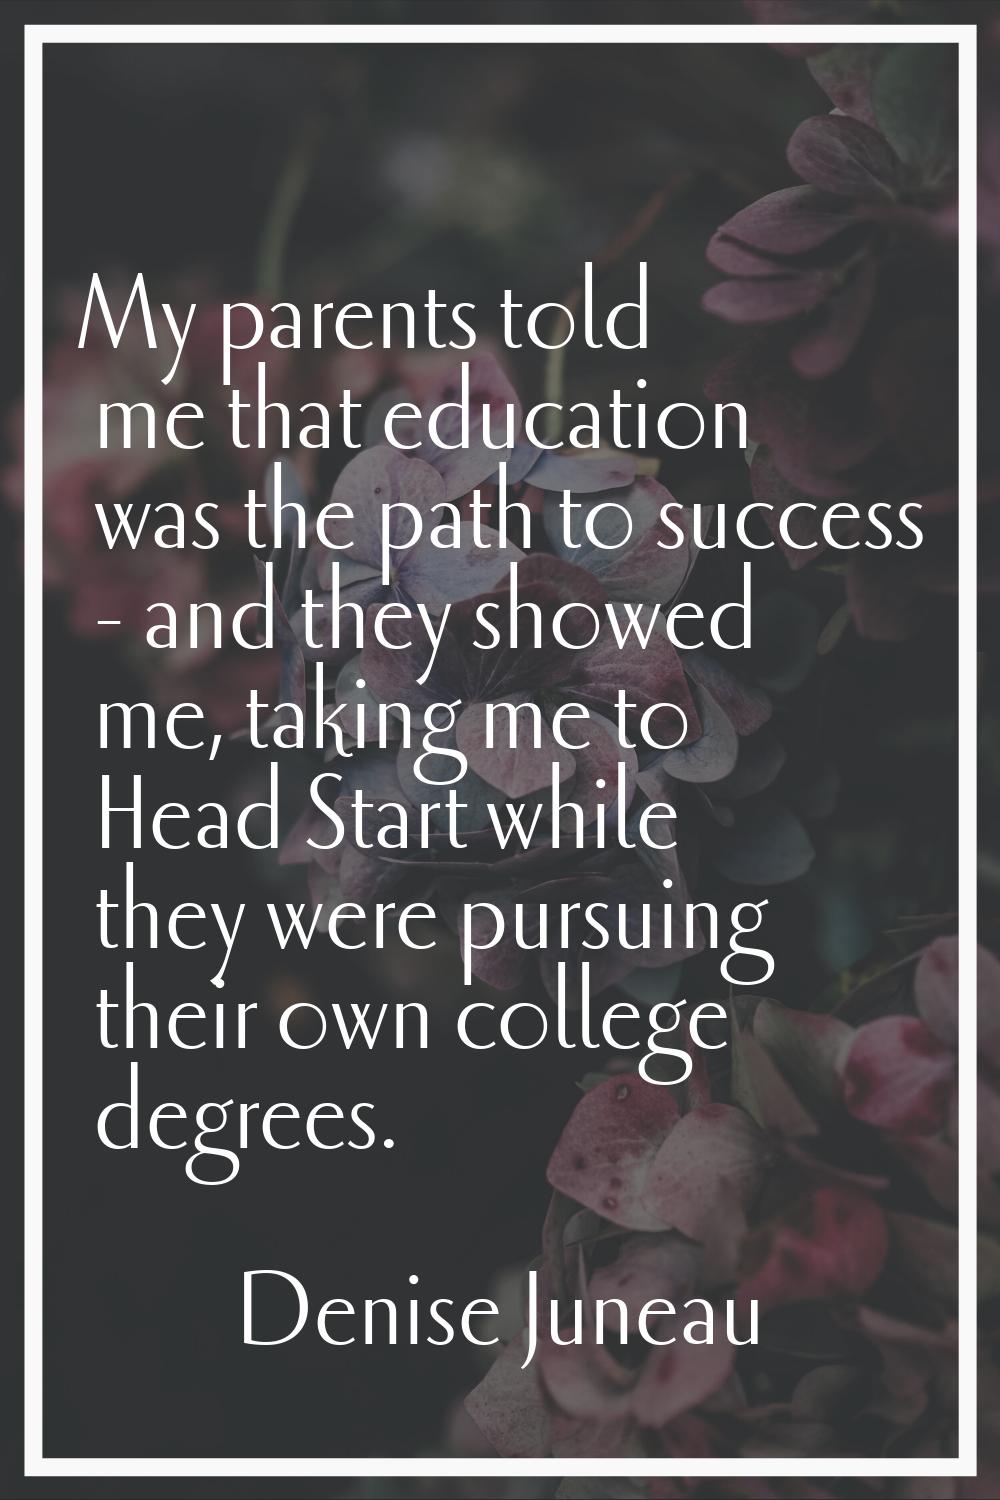 My parents told me that education was the path to success - and they showed me, taking me to Head S